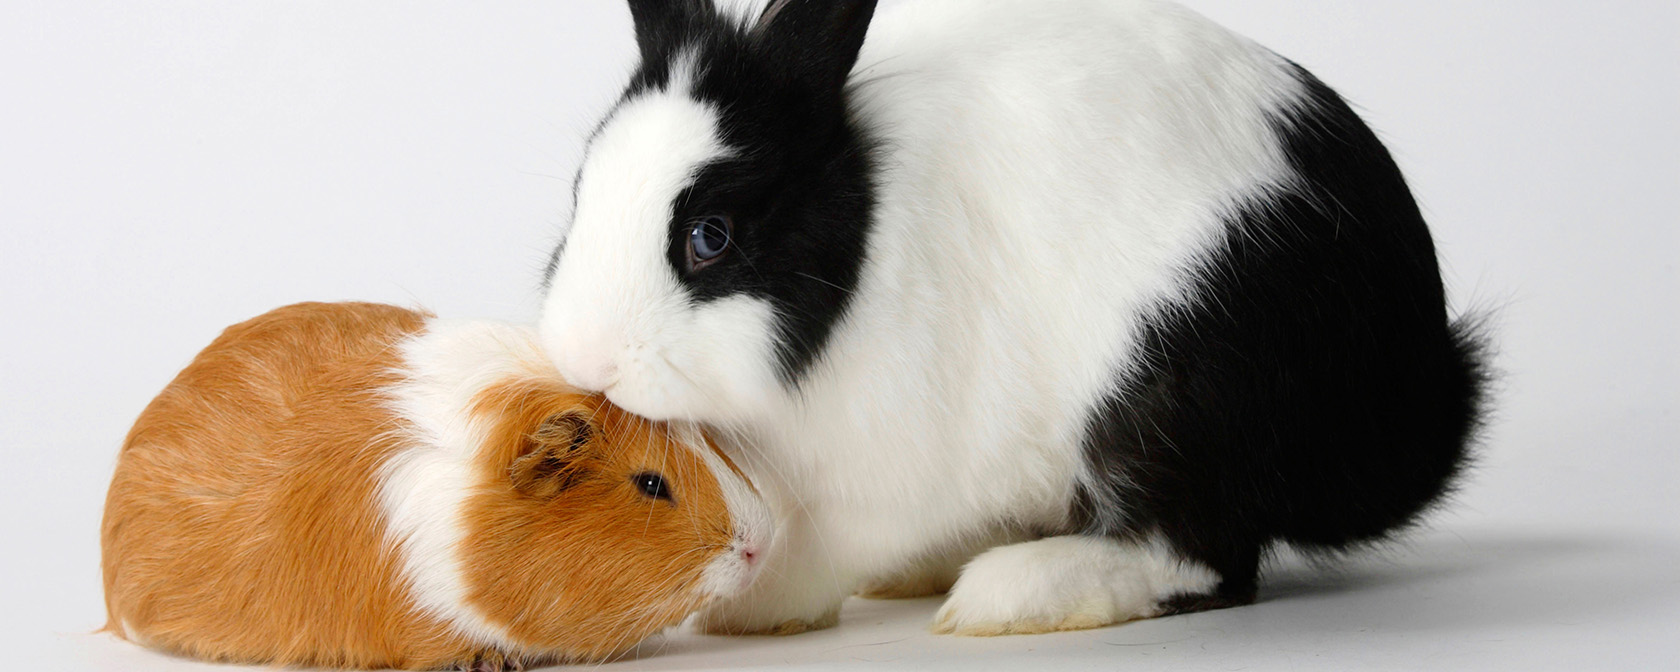 A decade’s worth of wins against cosmetics animal testing